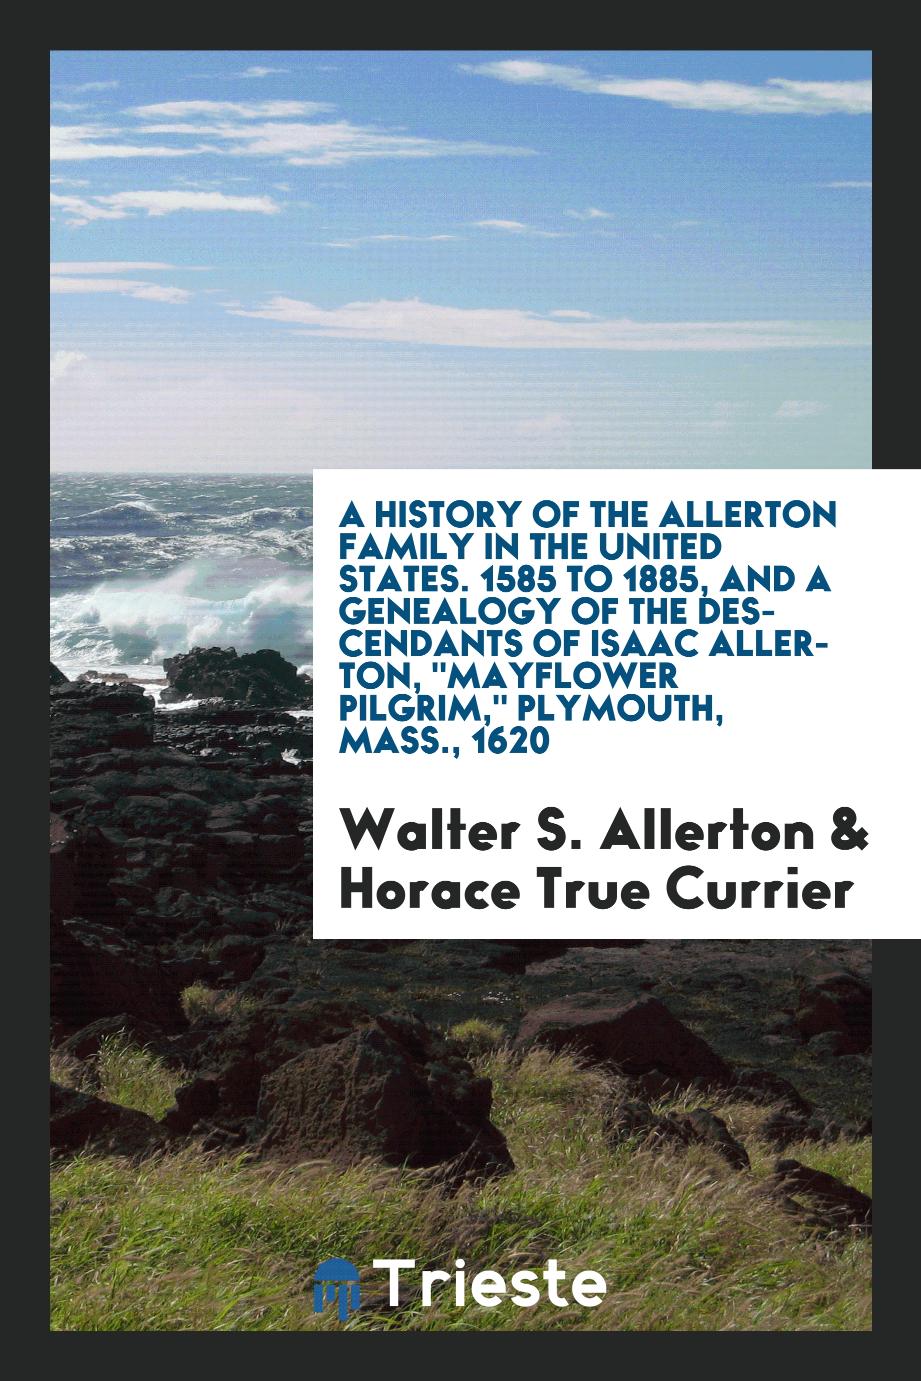 A history of the Allerton family in the United States. 1585 to 1885, and a genealogy of the descendants of Isaac Allerton, "Mayflower pilgrim," Plymouth, Mass., 1620